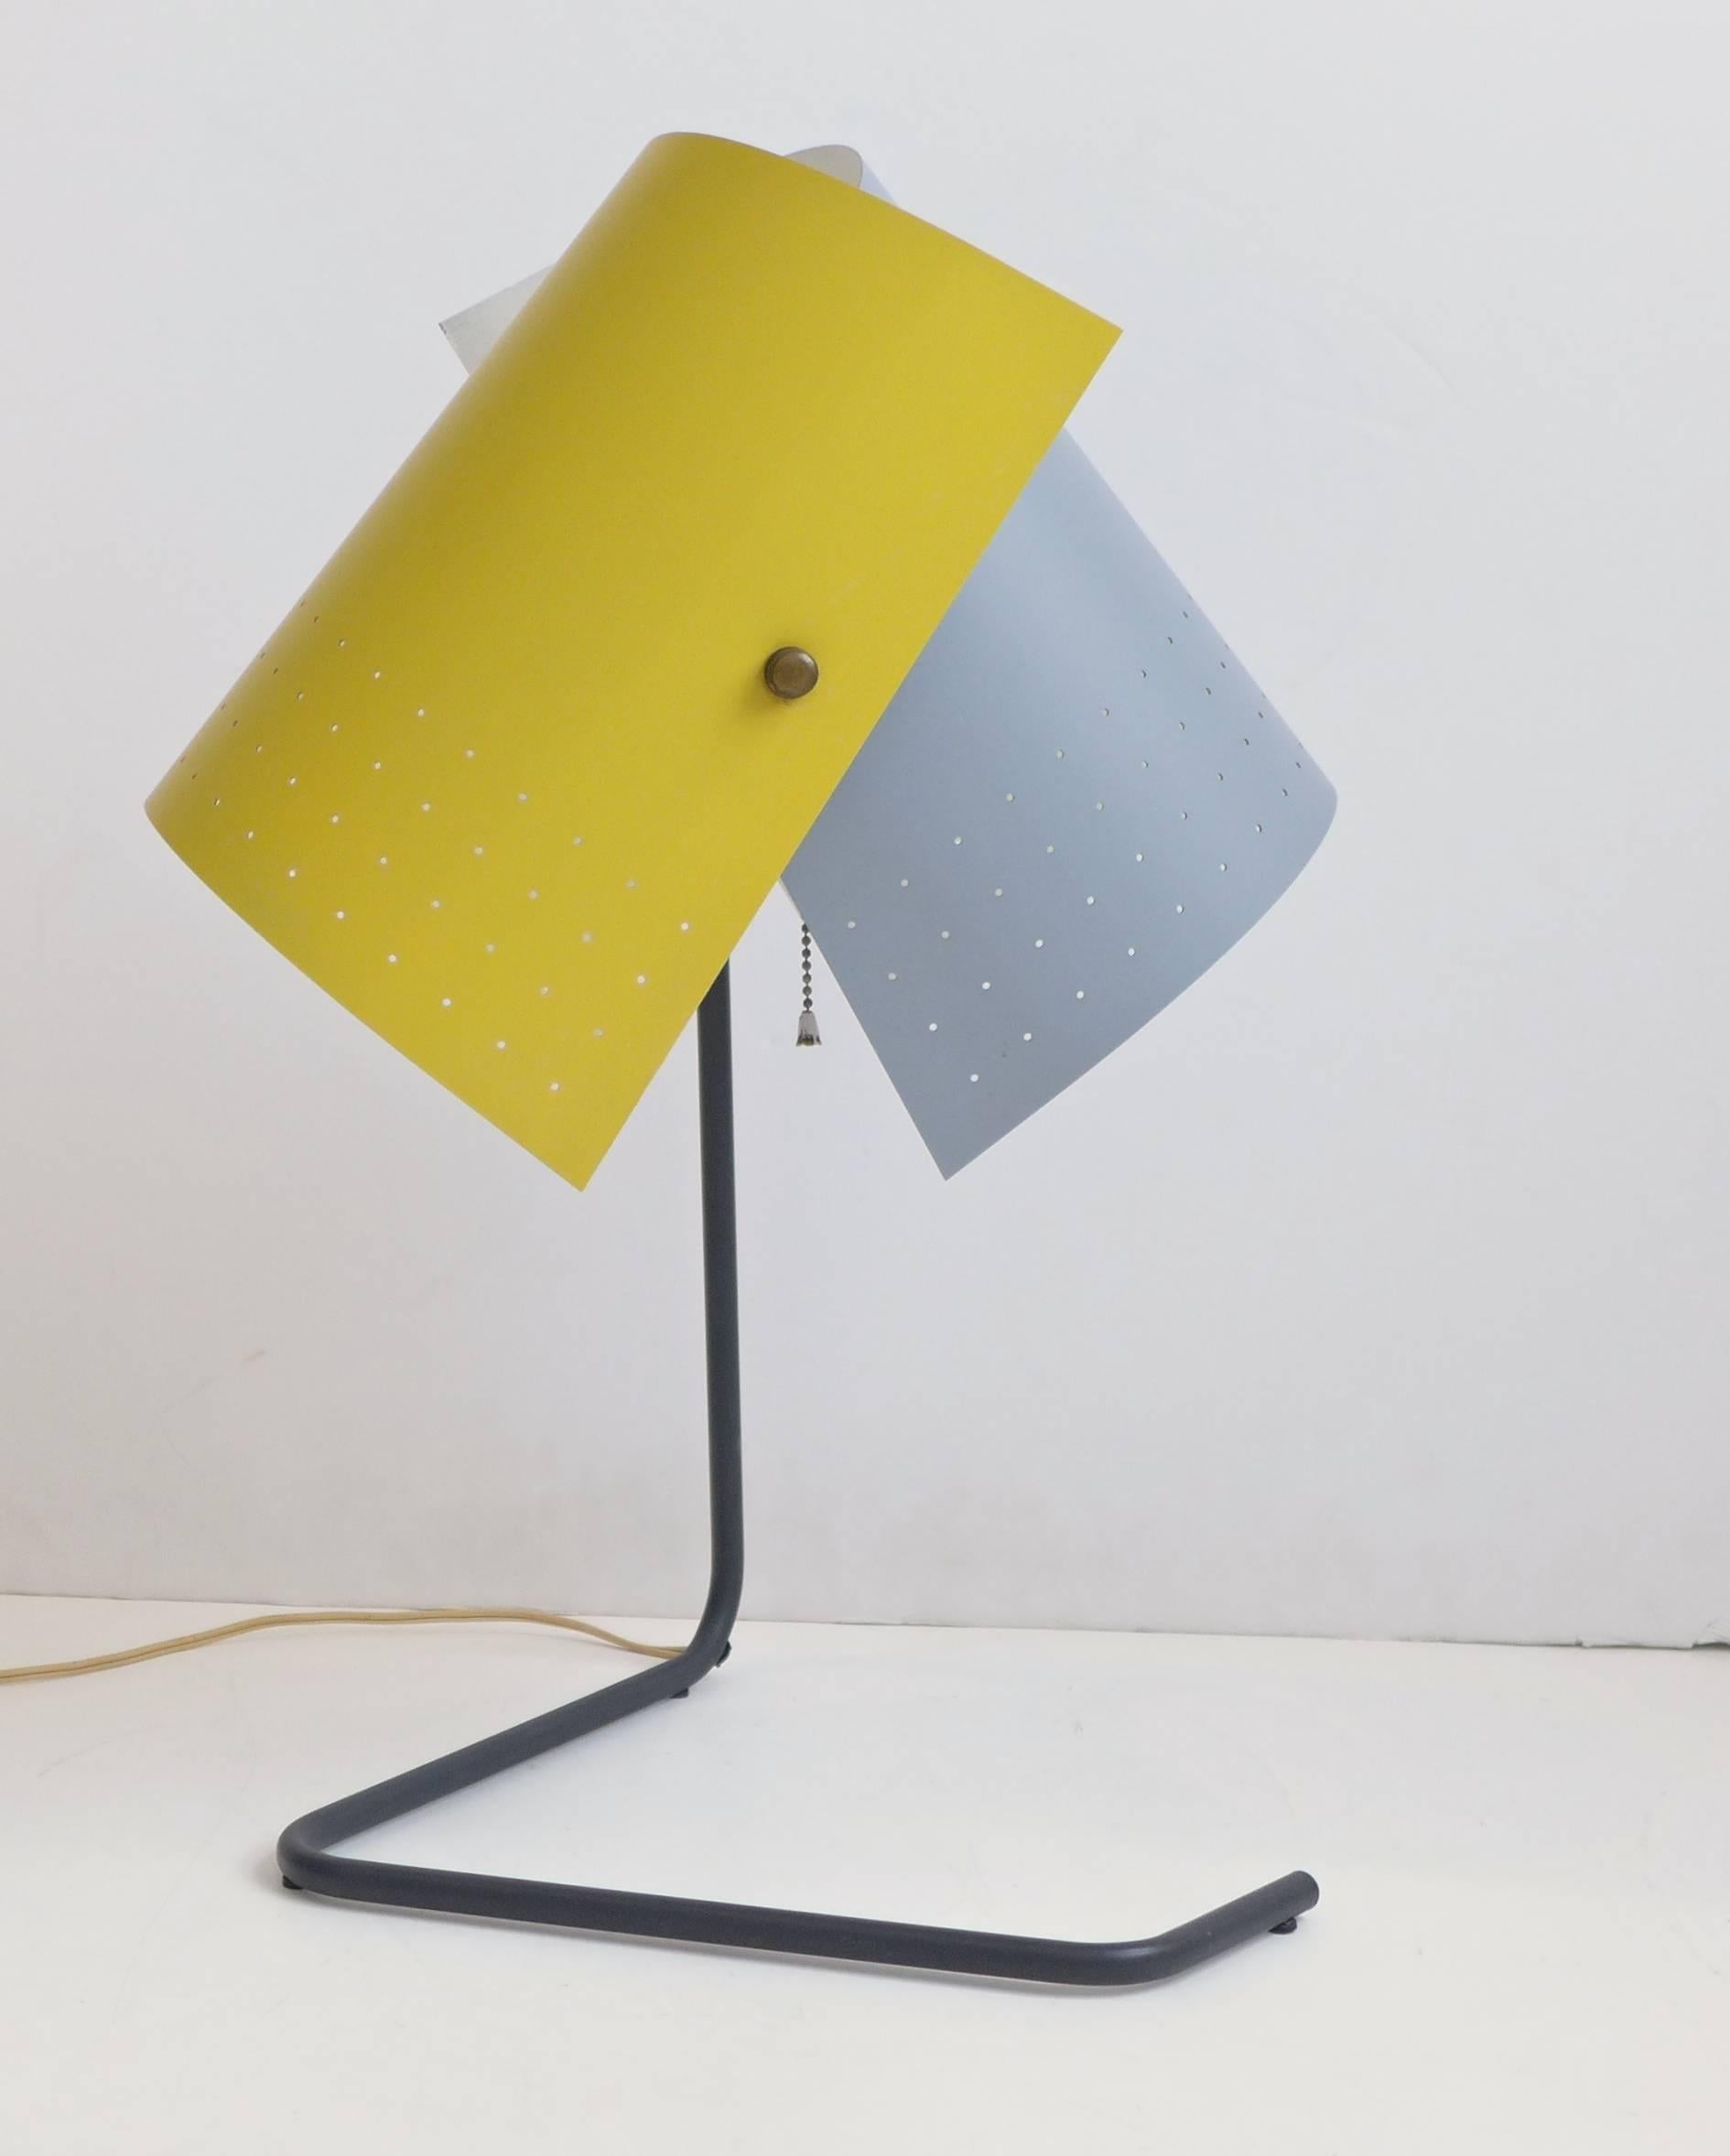 Enameled Lester Geis Table Lamp for MoMA Competition